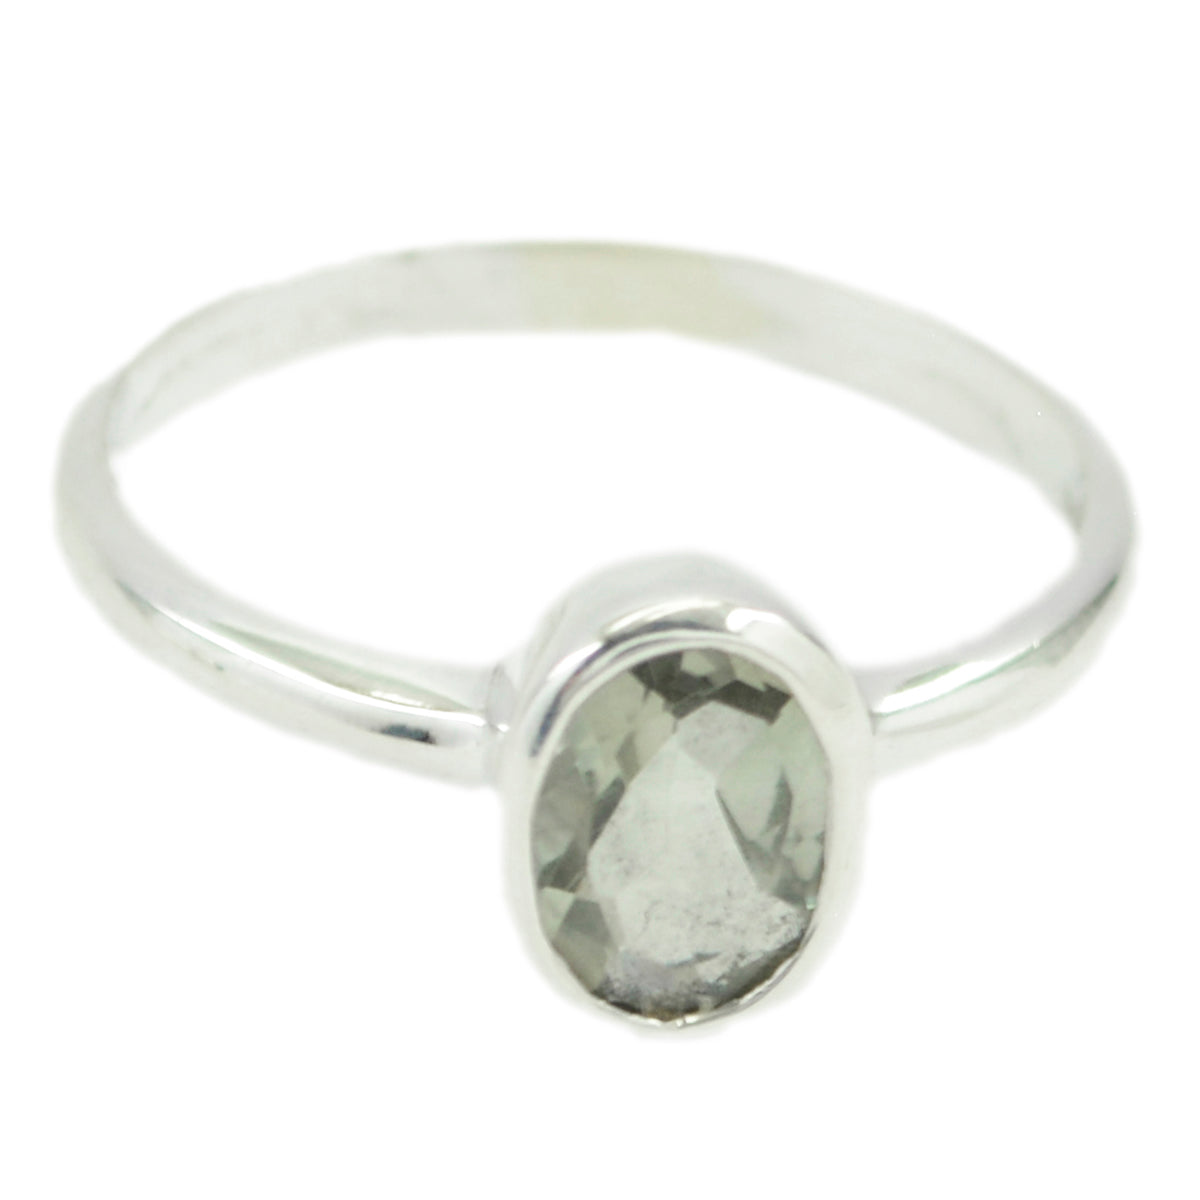 Magnetic Gem Green Amethyst 925 Sterling Silver Ring Great Selling Shop